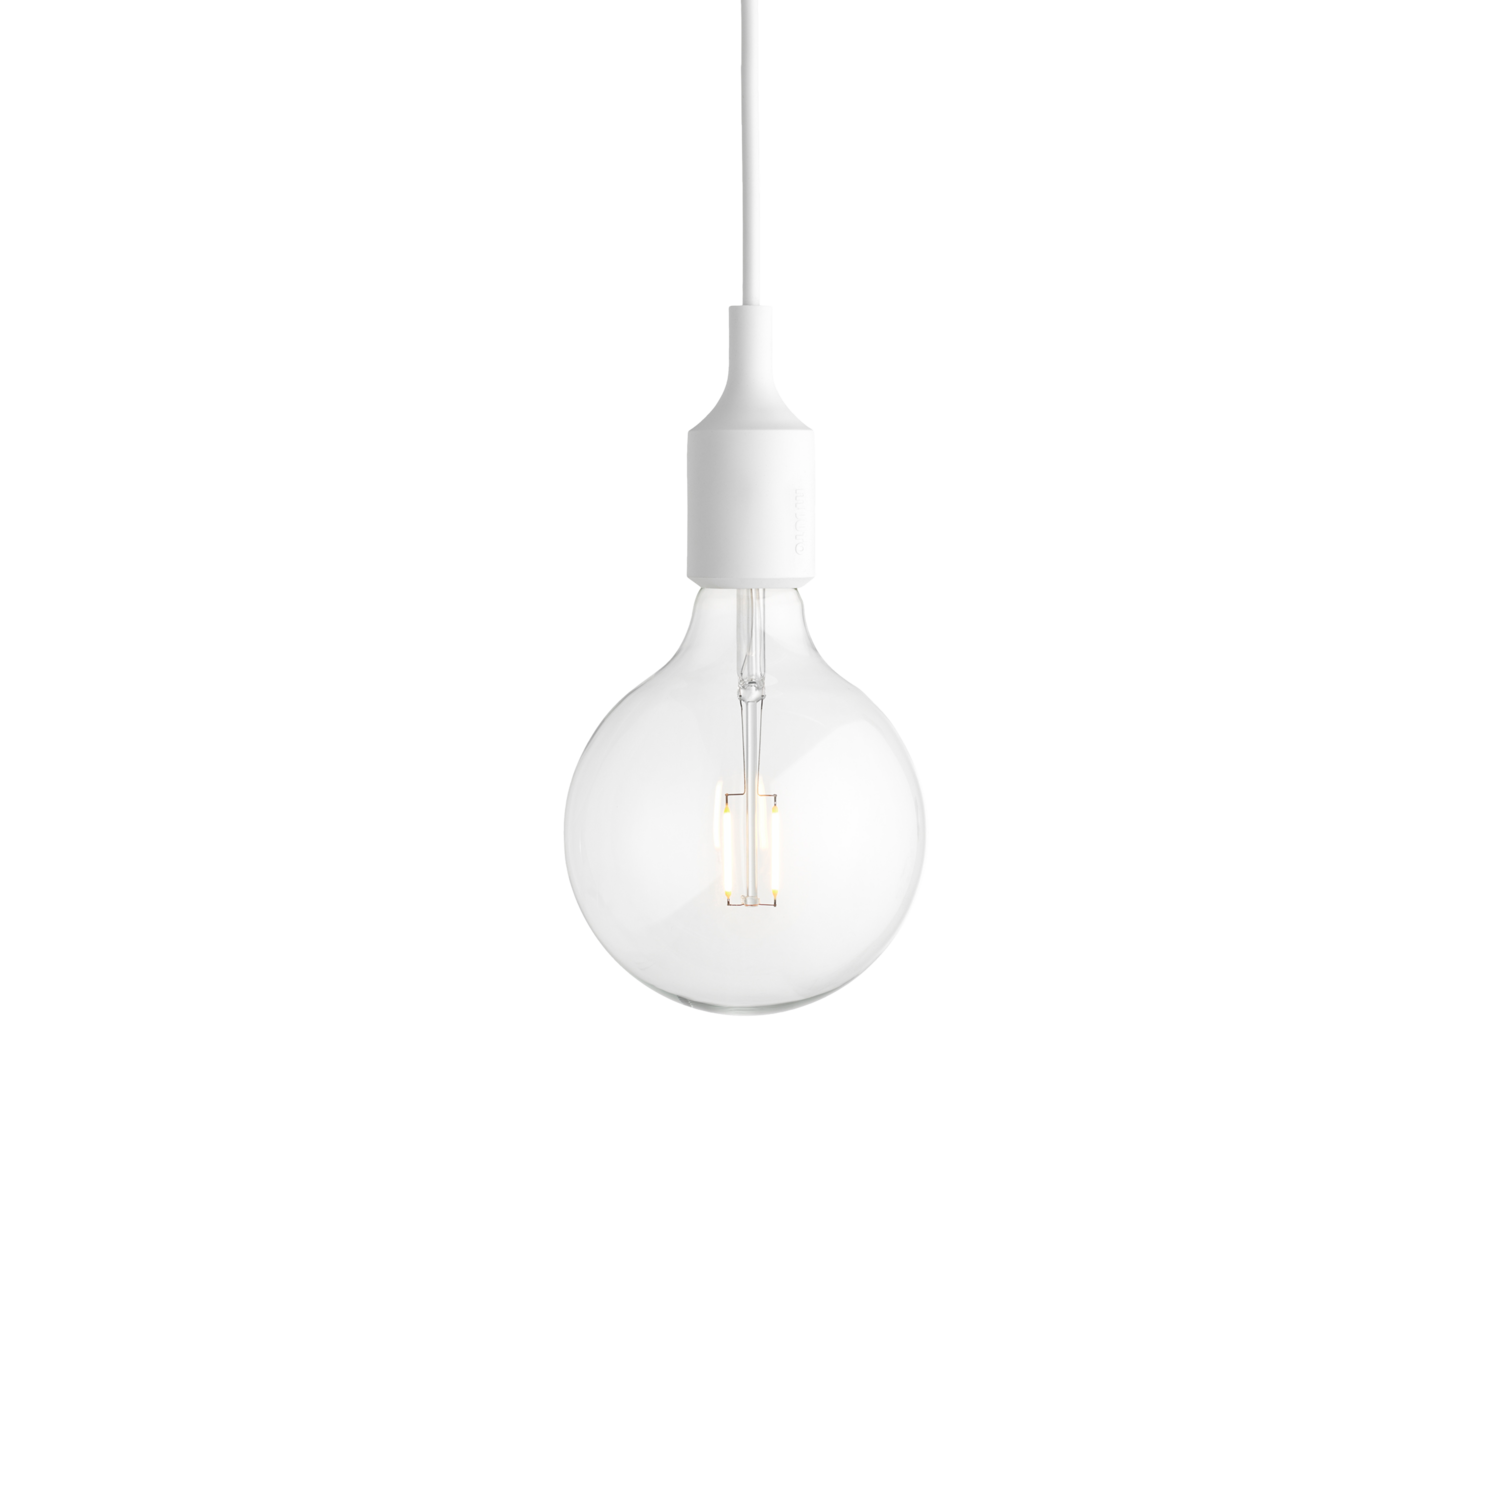 vochtigheid meel Stoutmoedig E27 Pendant Lamp | Industrial style lamp that suits your needs